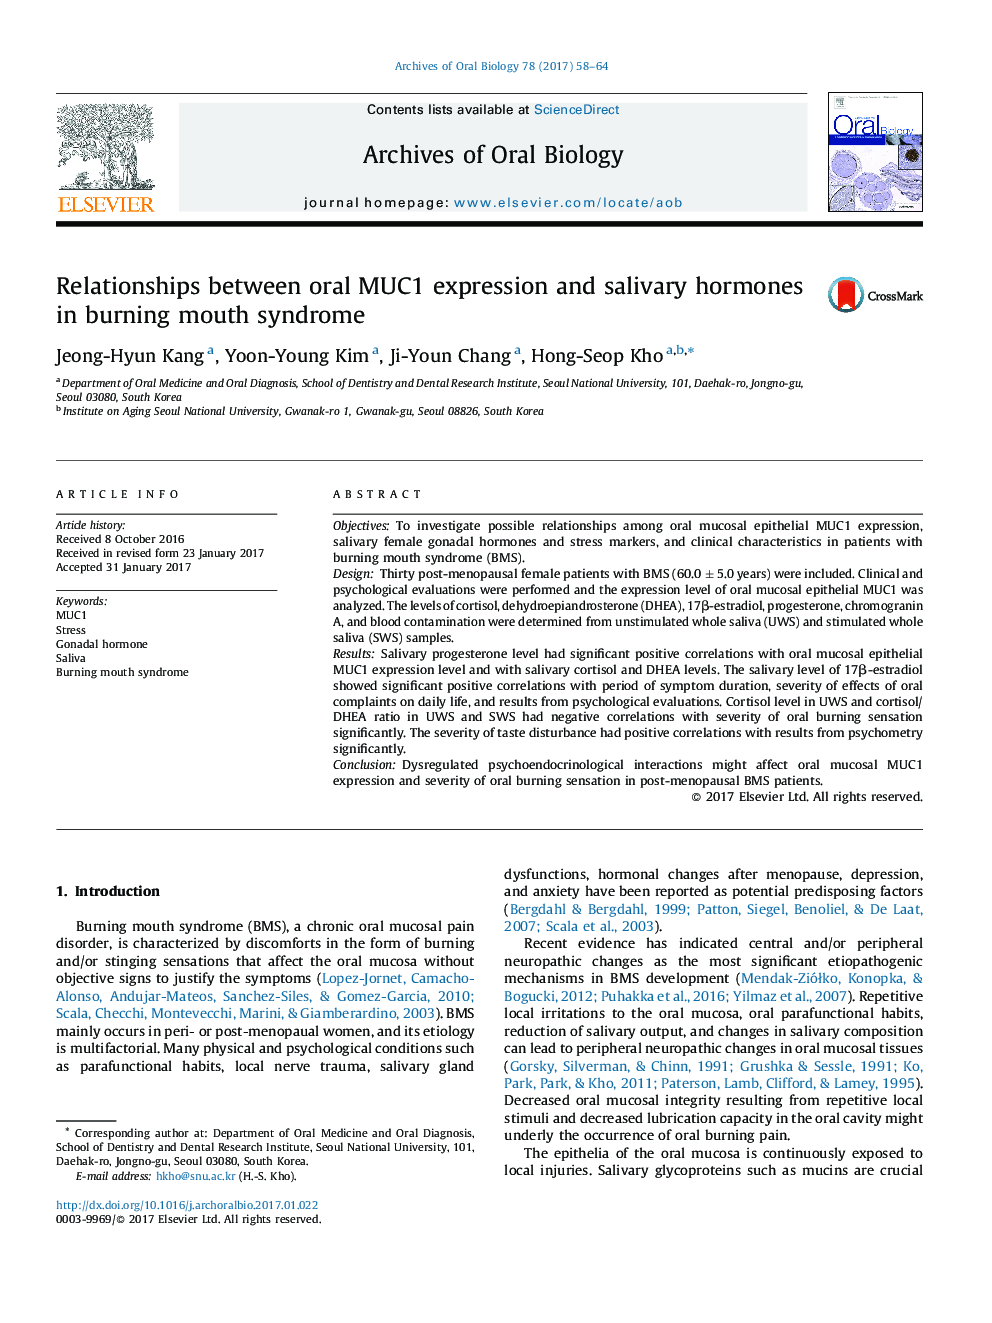 Relationships between oral MUC1 expression and salivary hormones in burning mouth syndrome